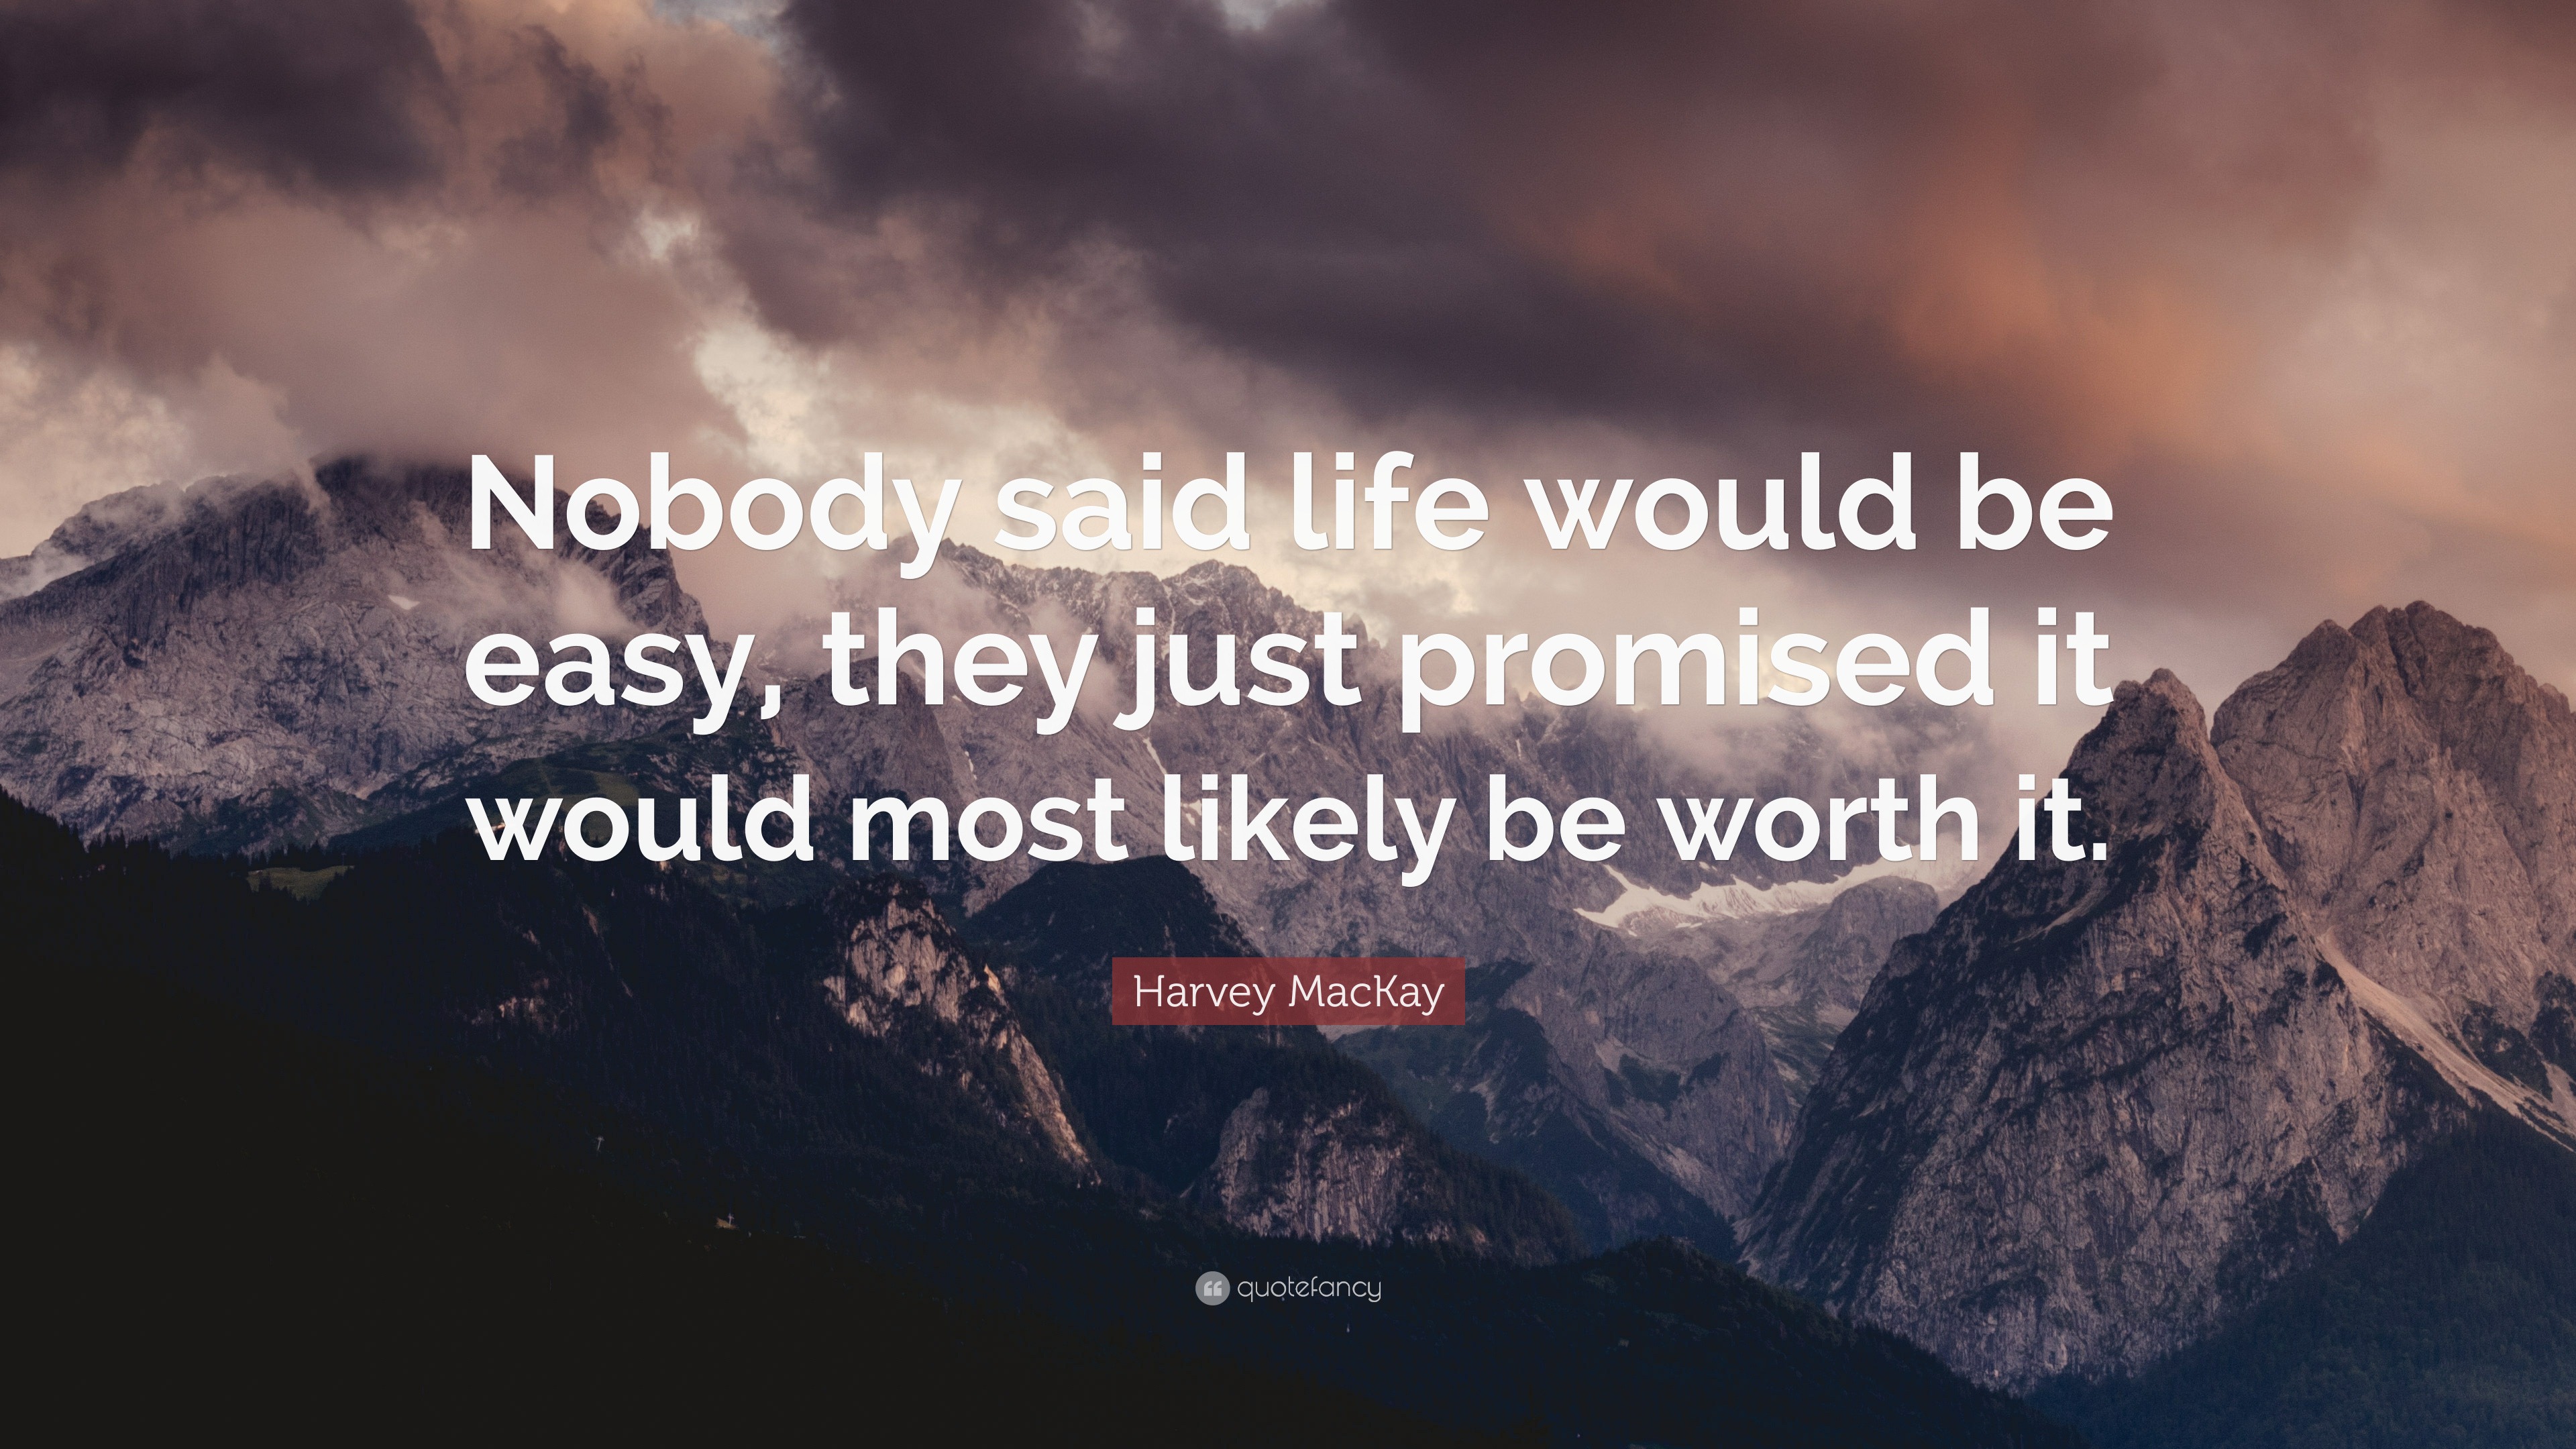 Harvey MacKay Quote: “Nobody said life would be easy, they just ...